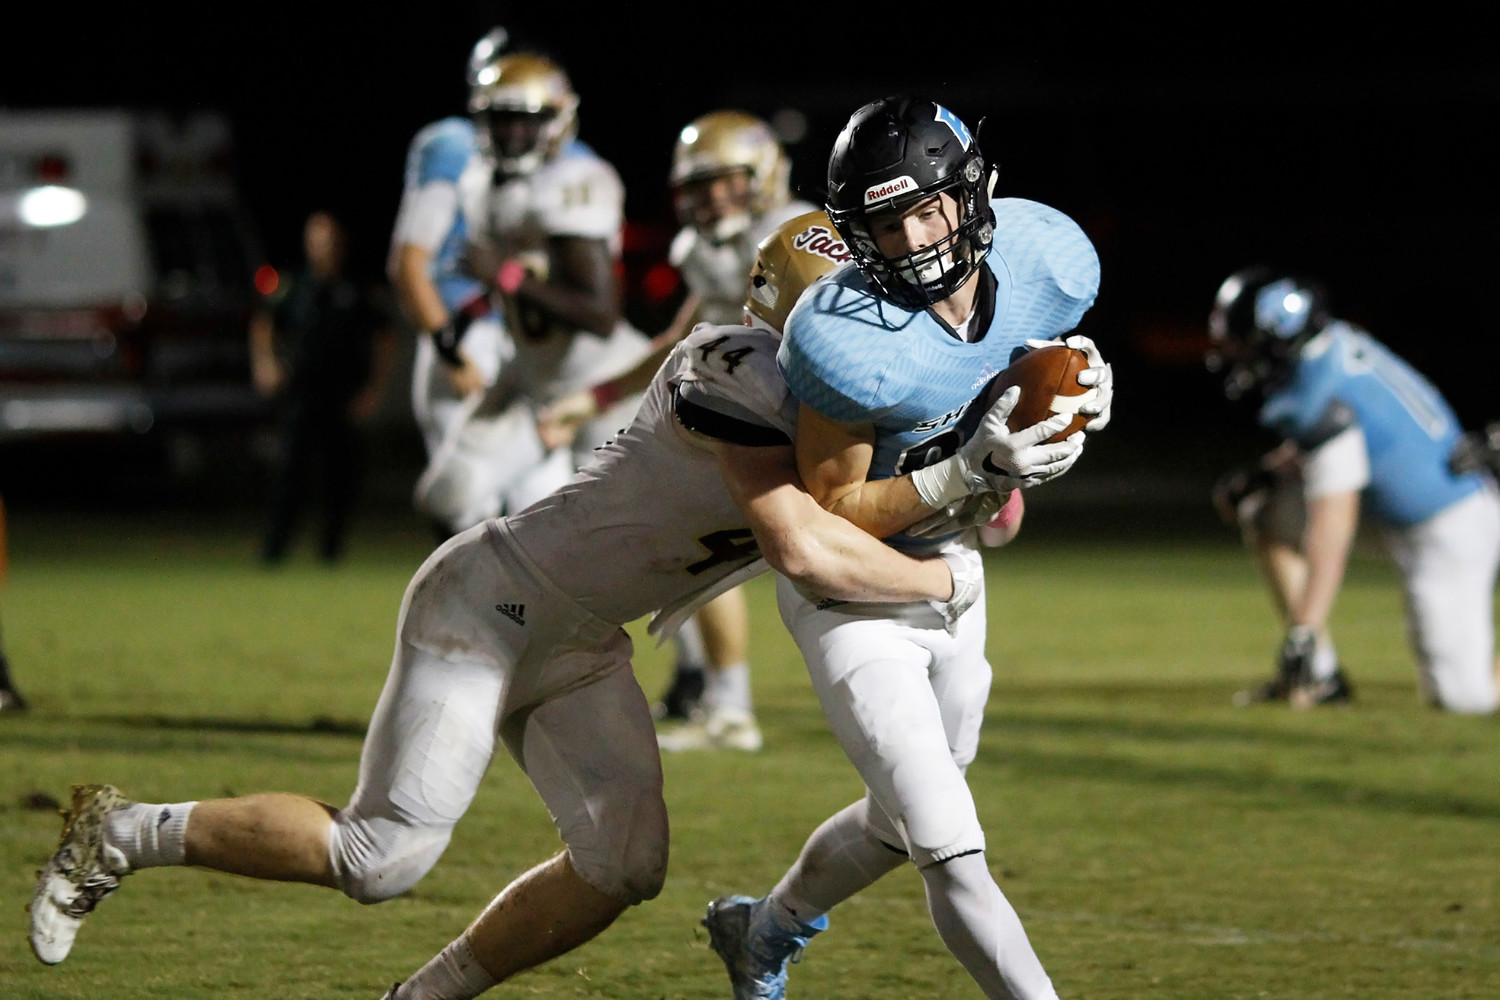 Reese Russi of Ponte Vedra is tackled after catching a Jack Murrah pass.